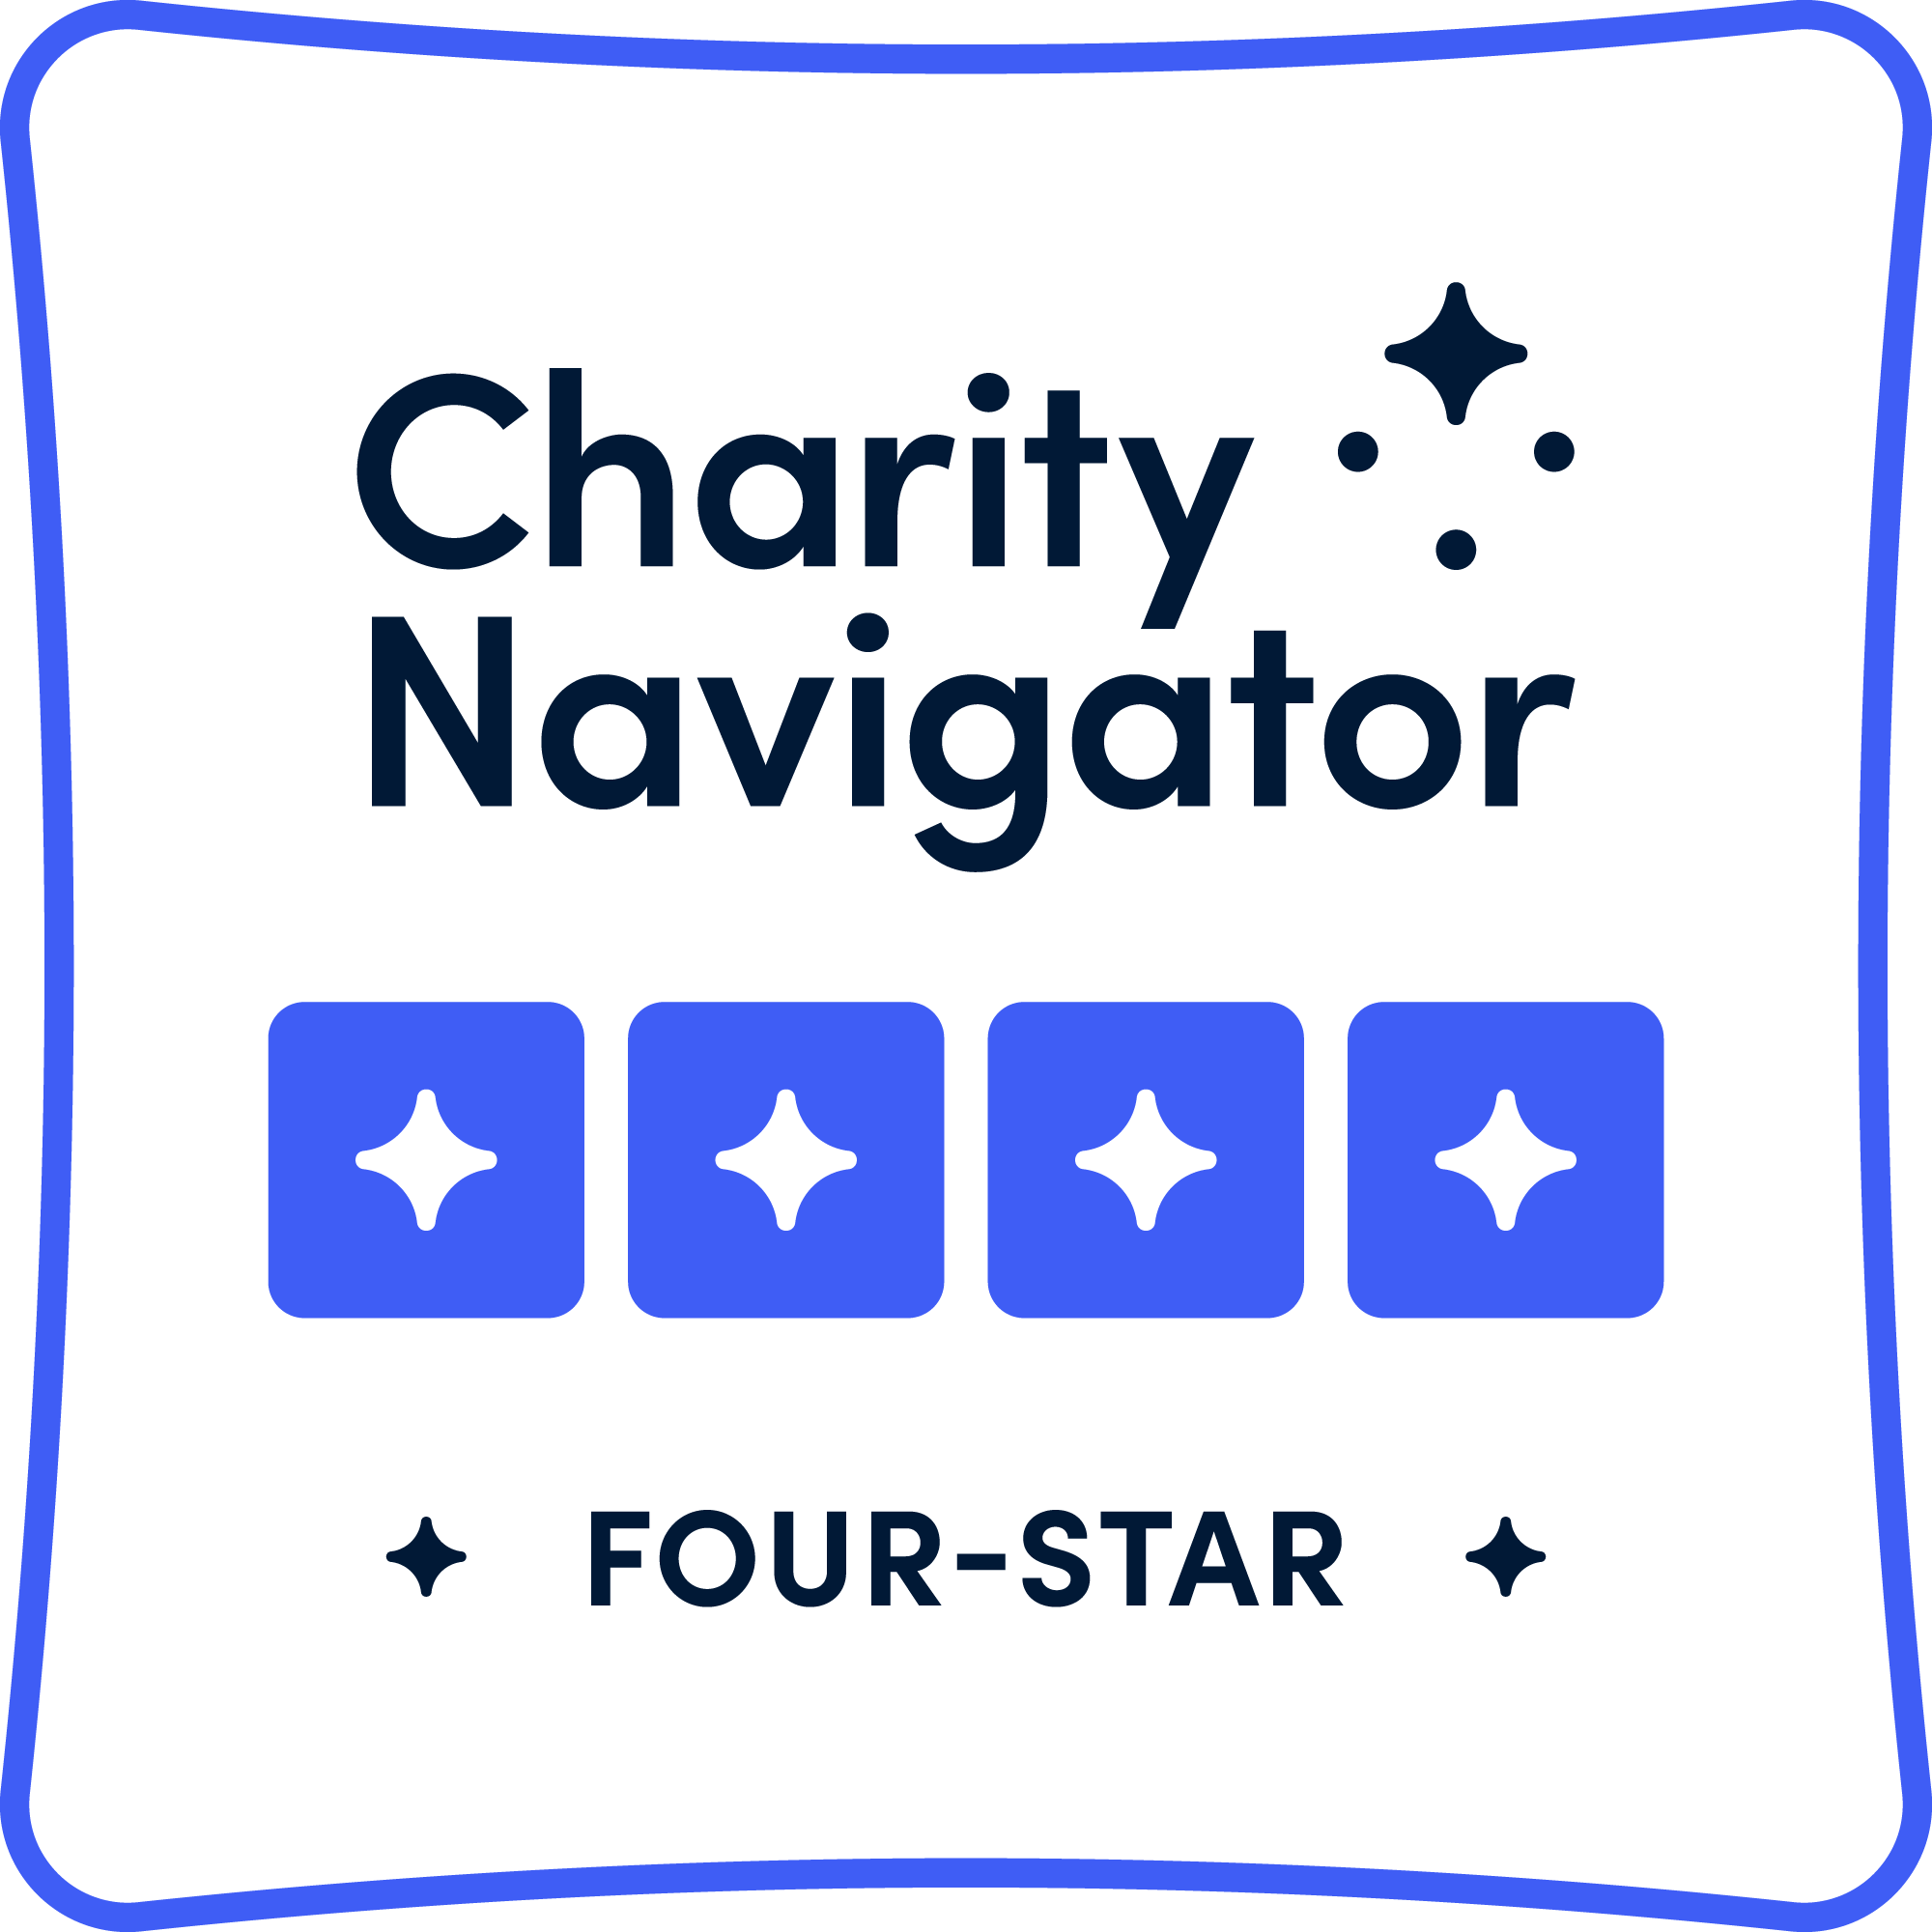 Charity Navigator Four-Star Charity Rating